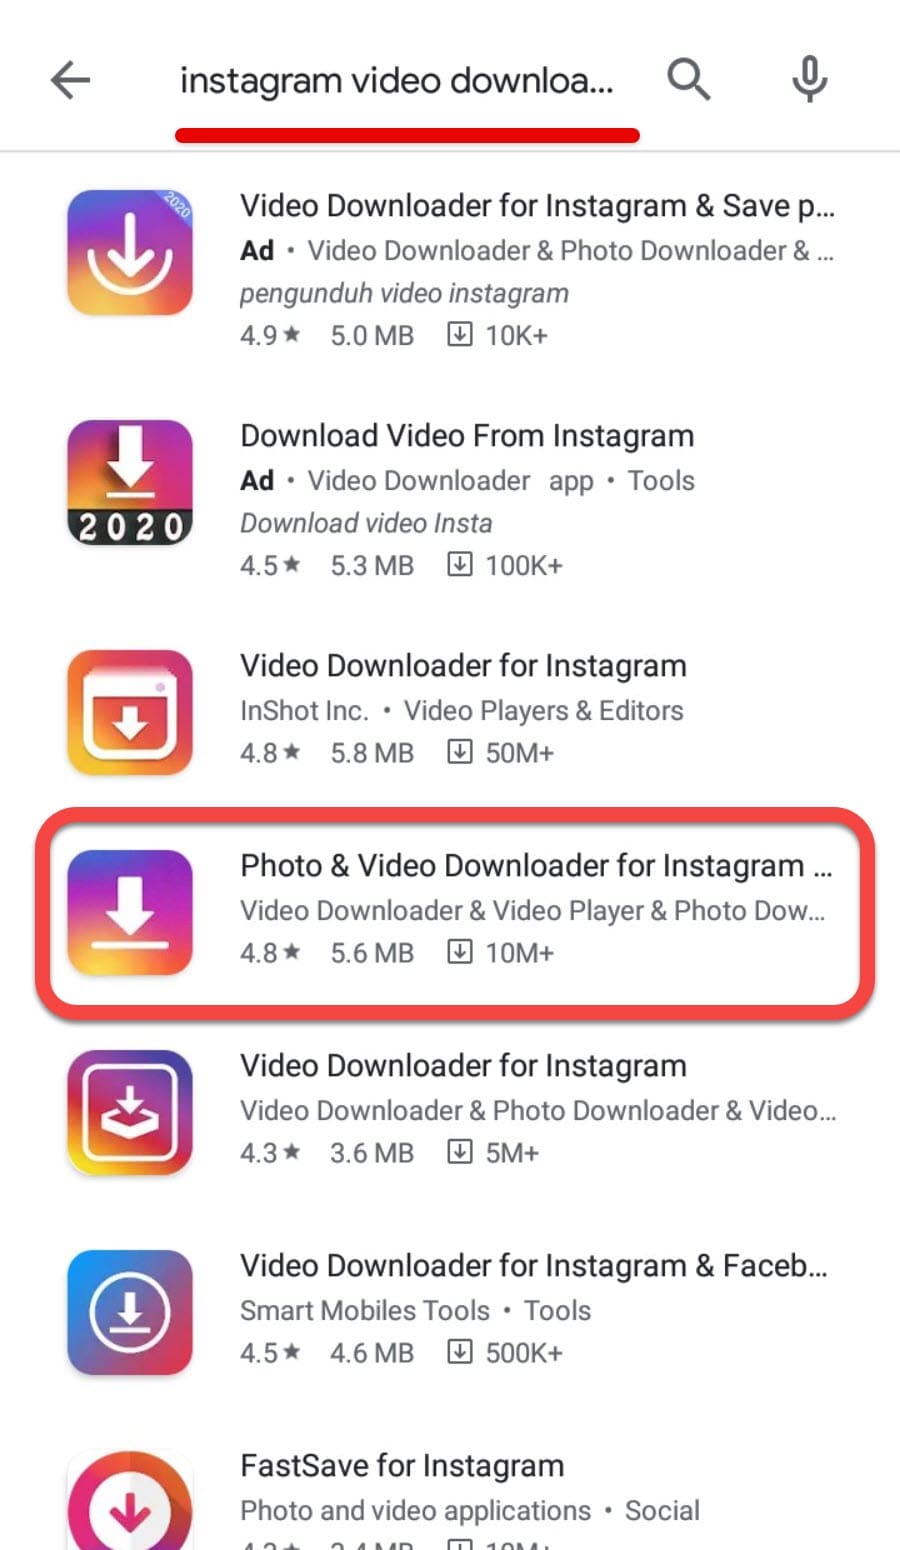 how to download image from instagram